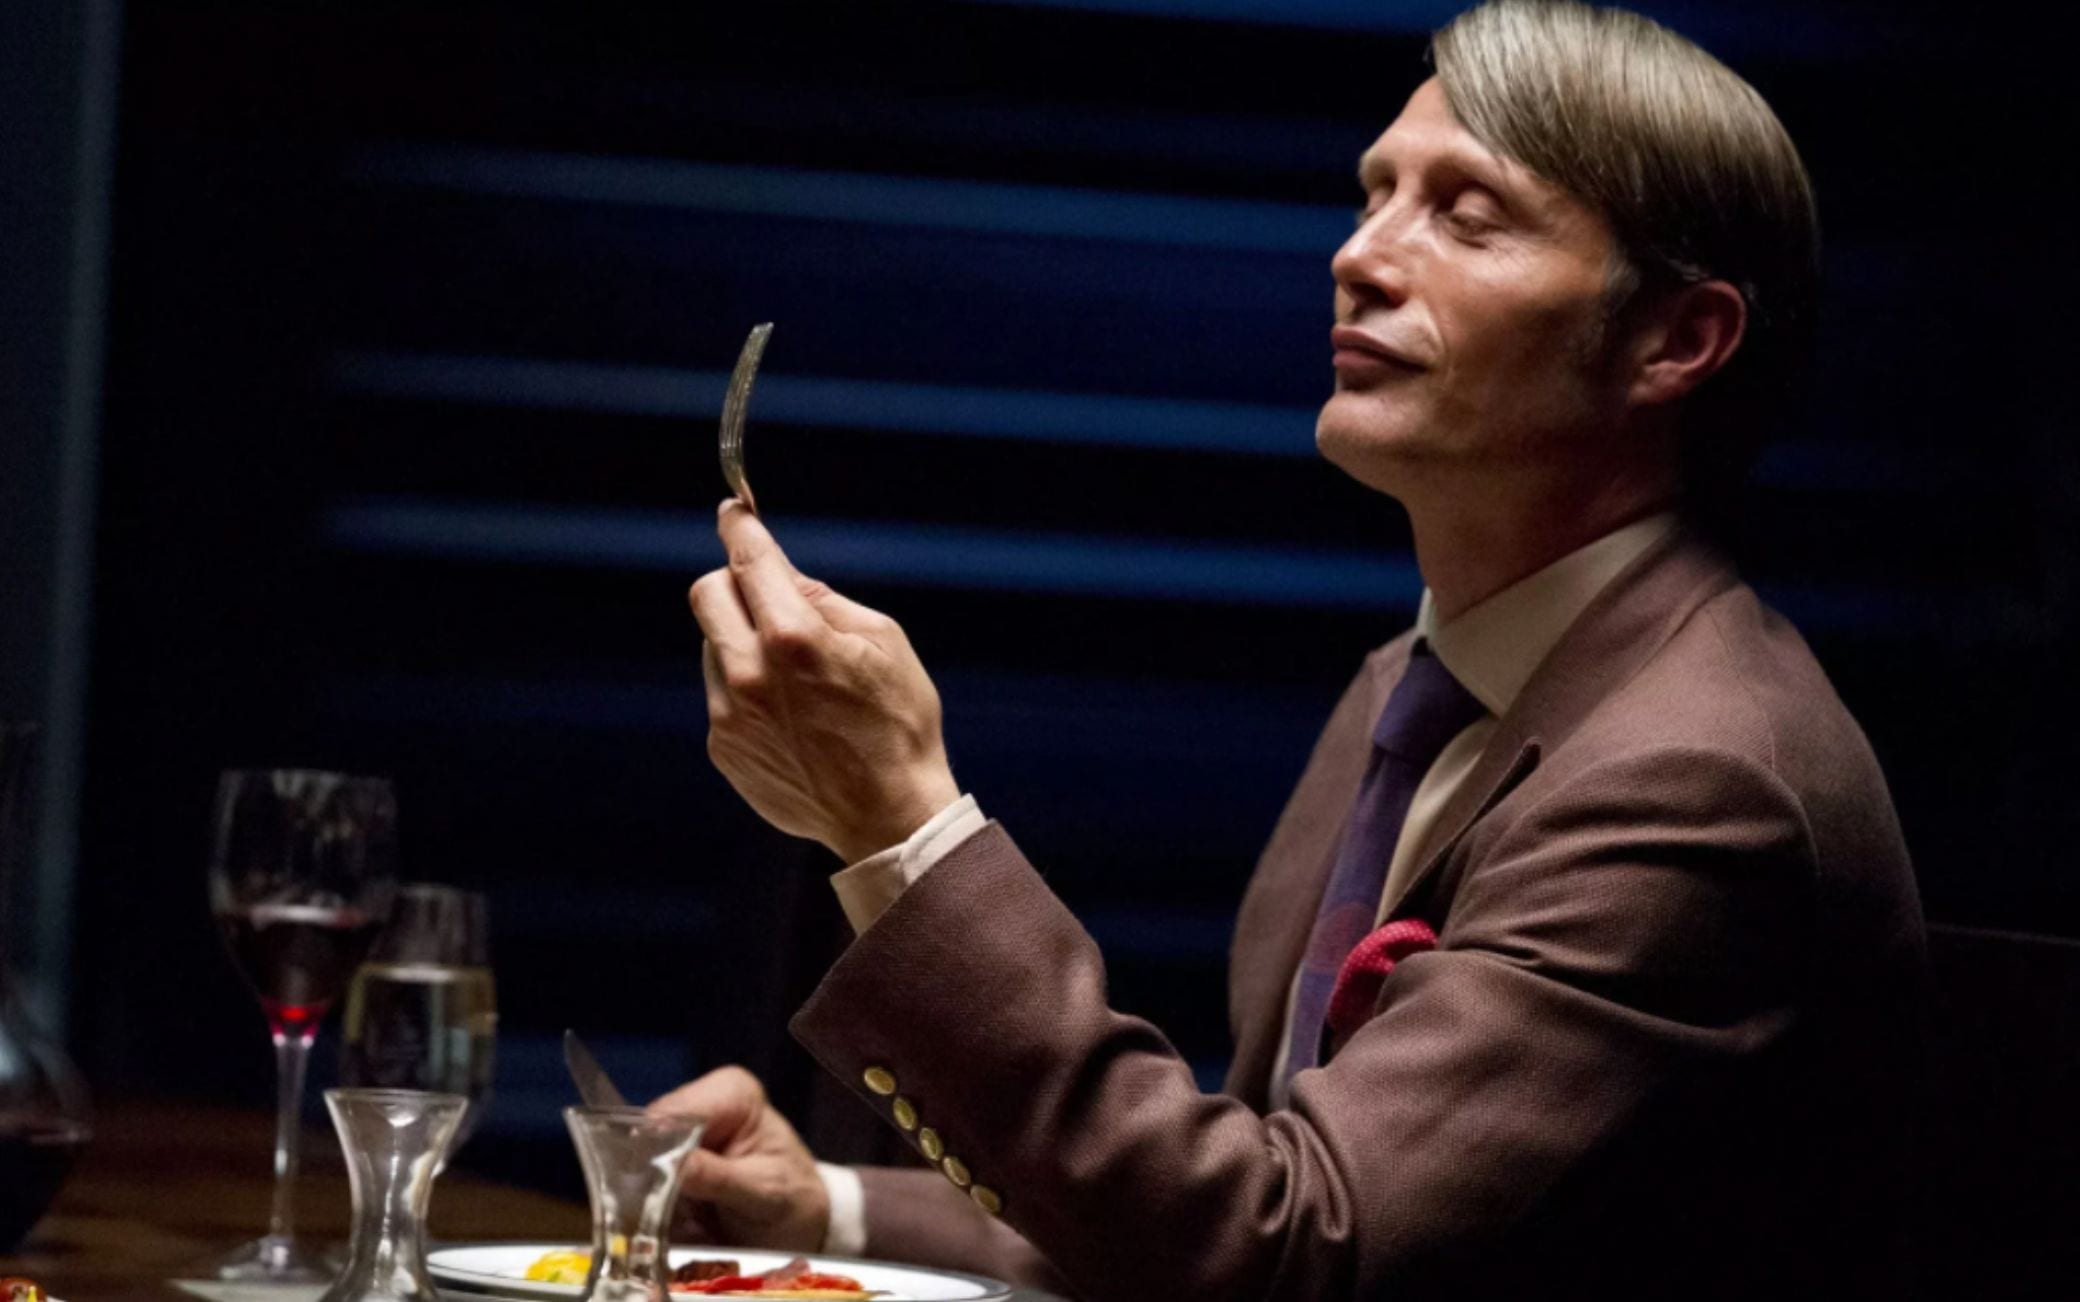 Hannibal 4: Mads Mikkelsen continua a mostrare ottimismo